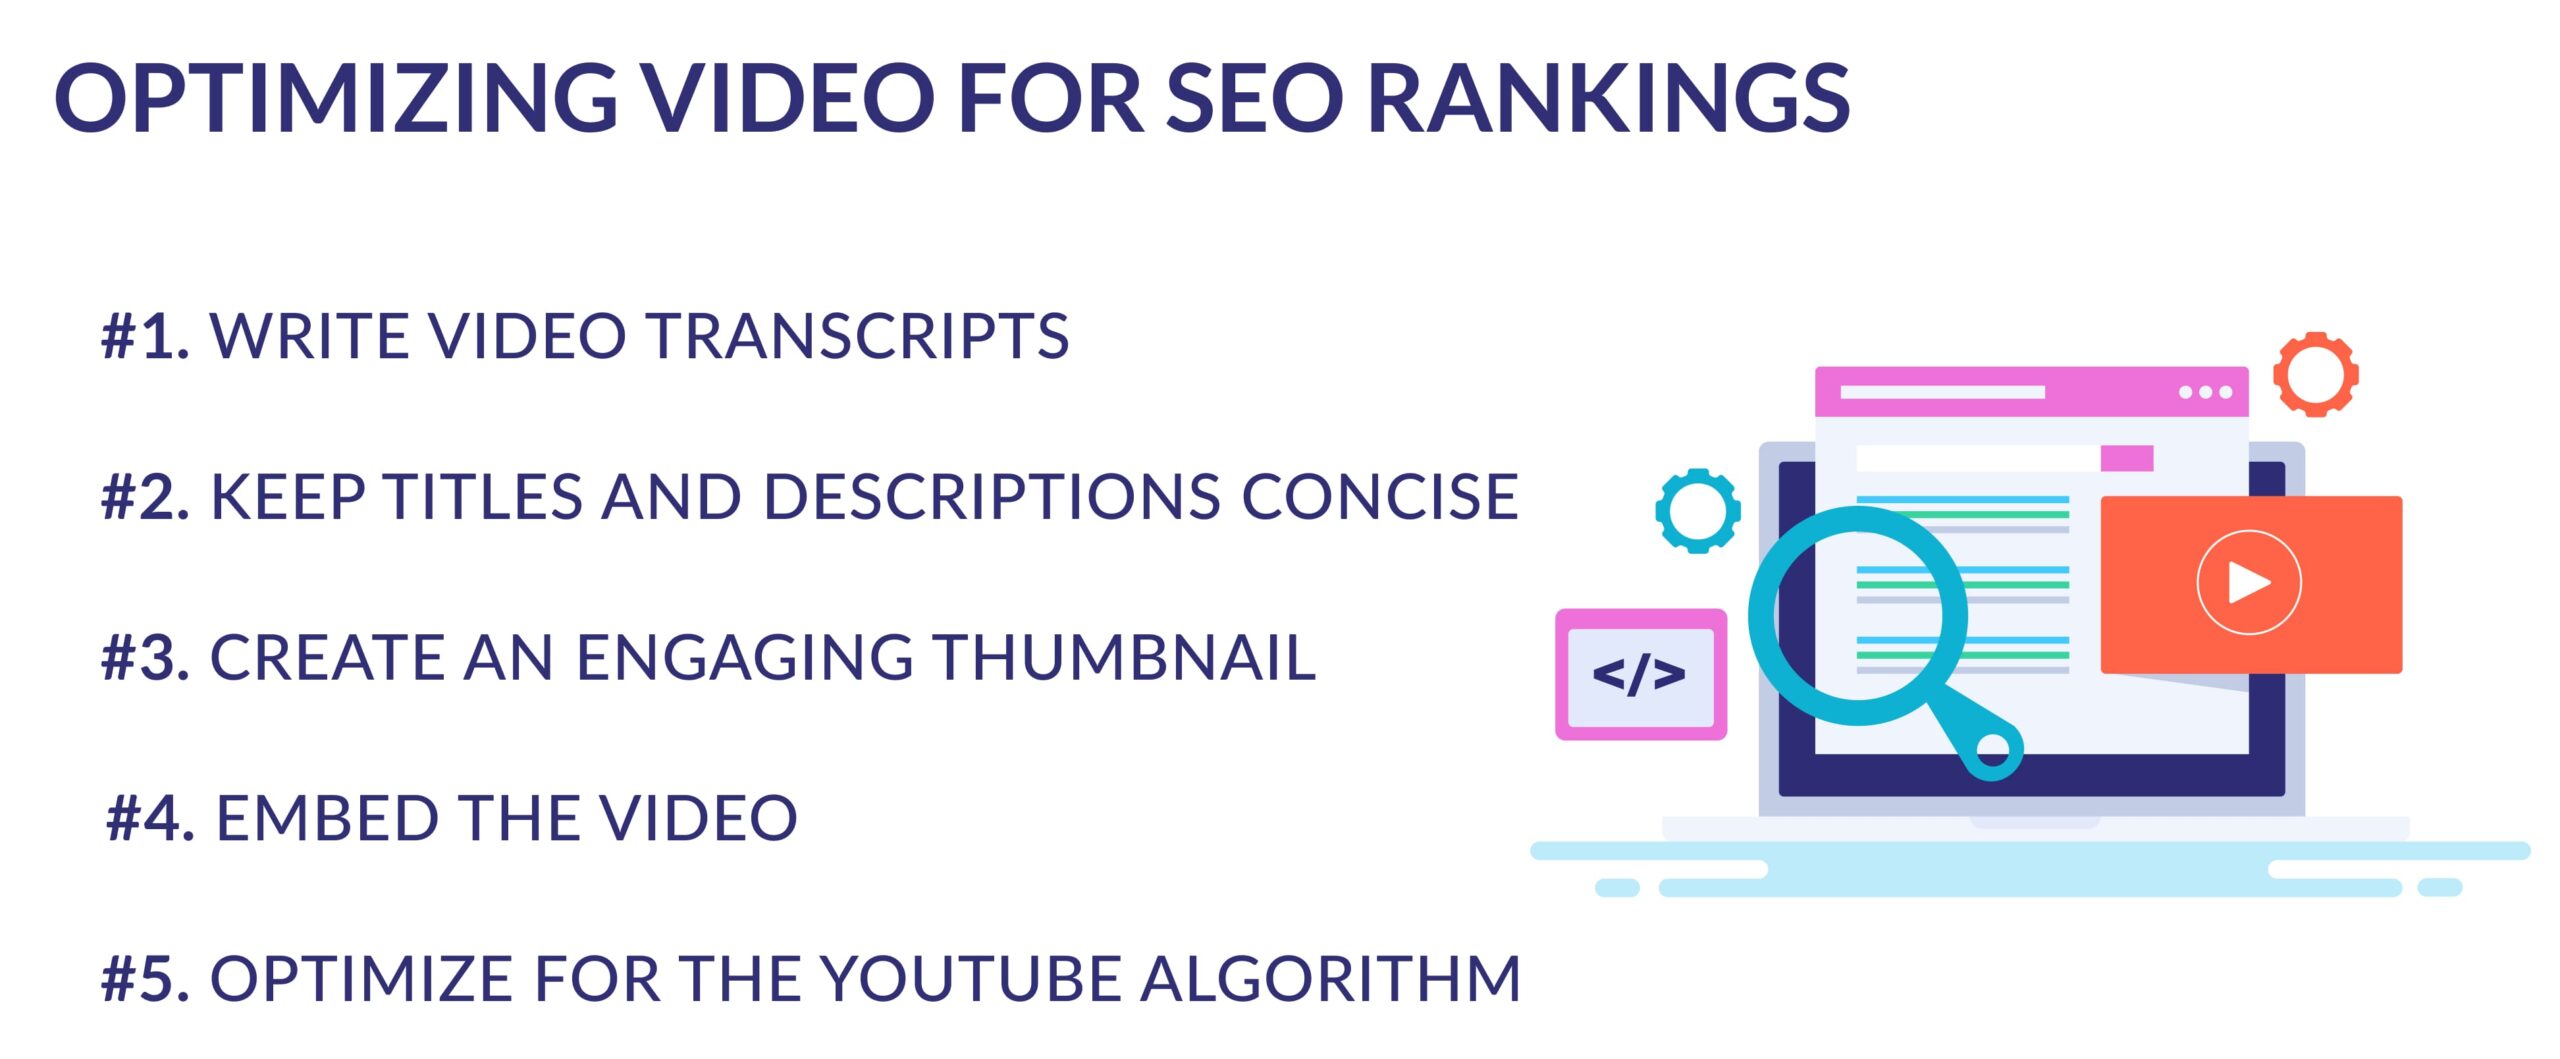 List of 5 ways to optimize your videos for SEO rankings